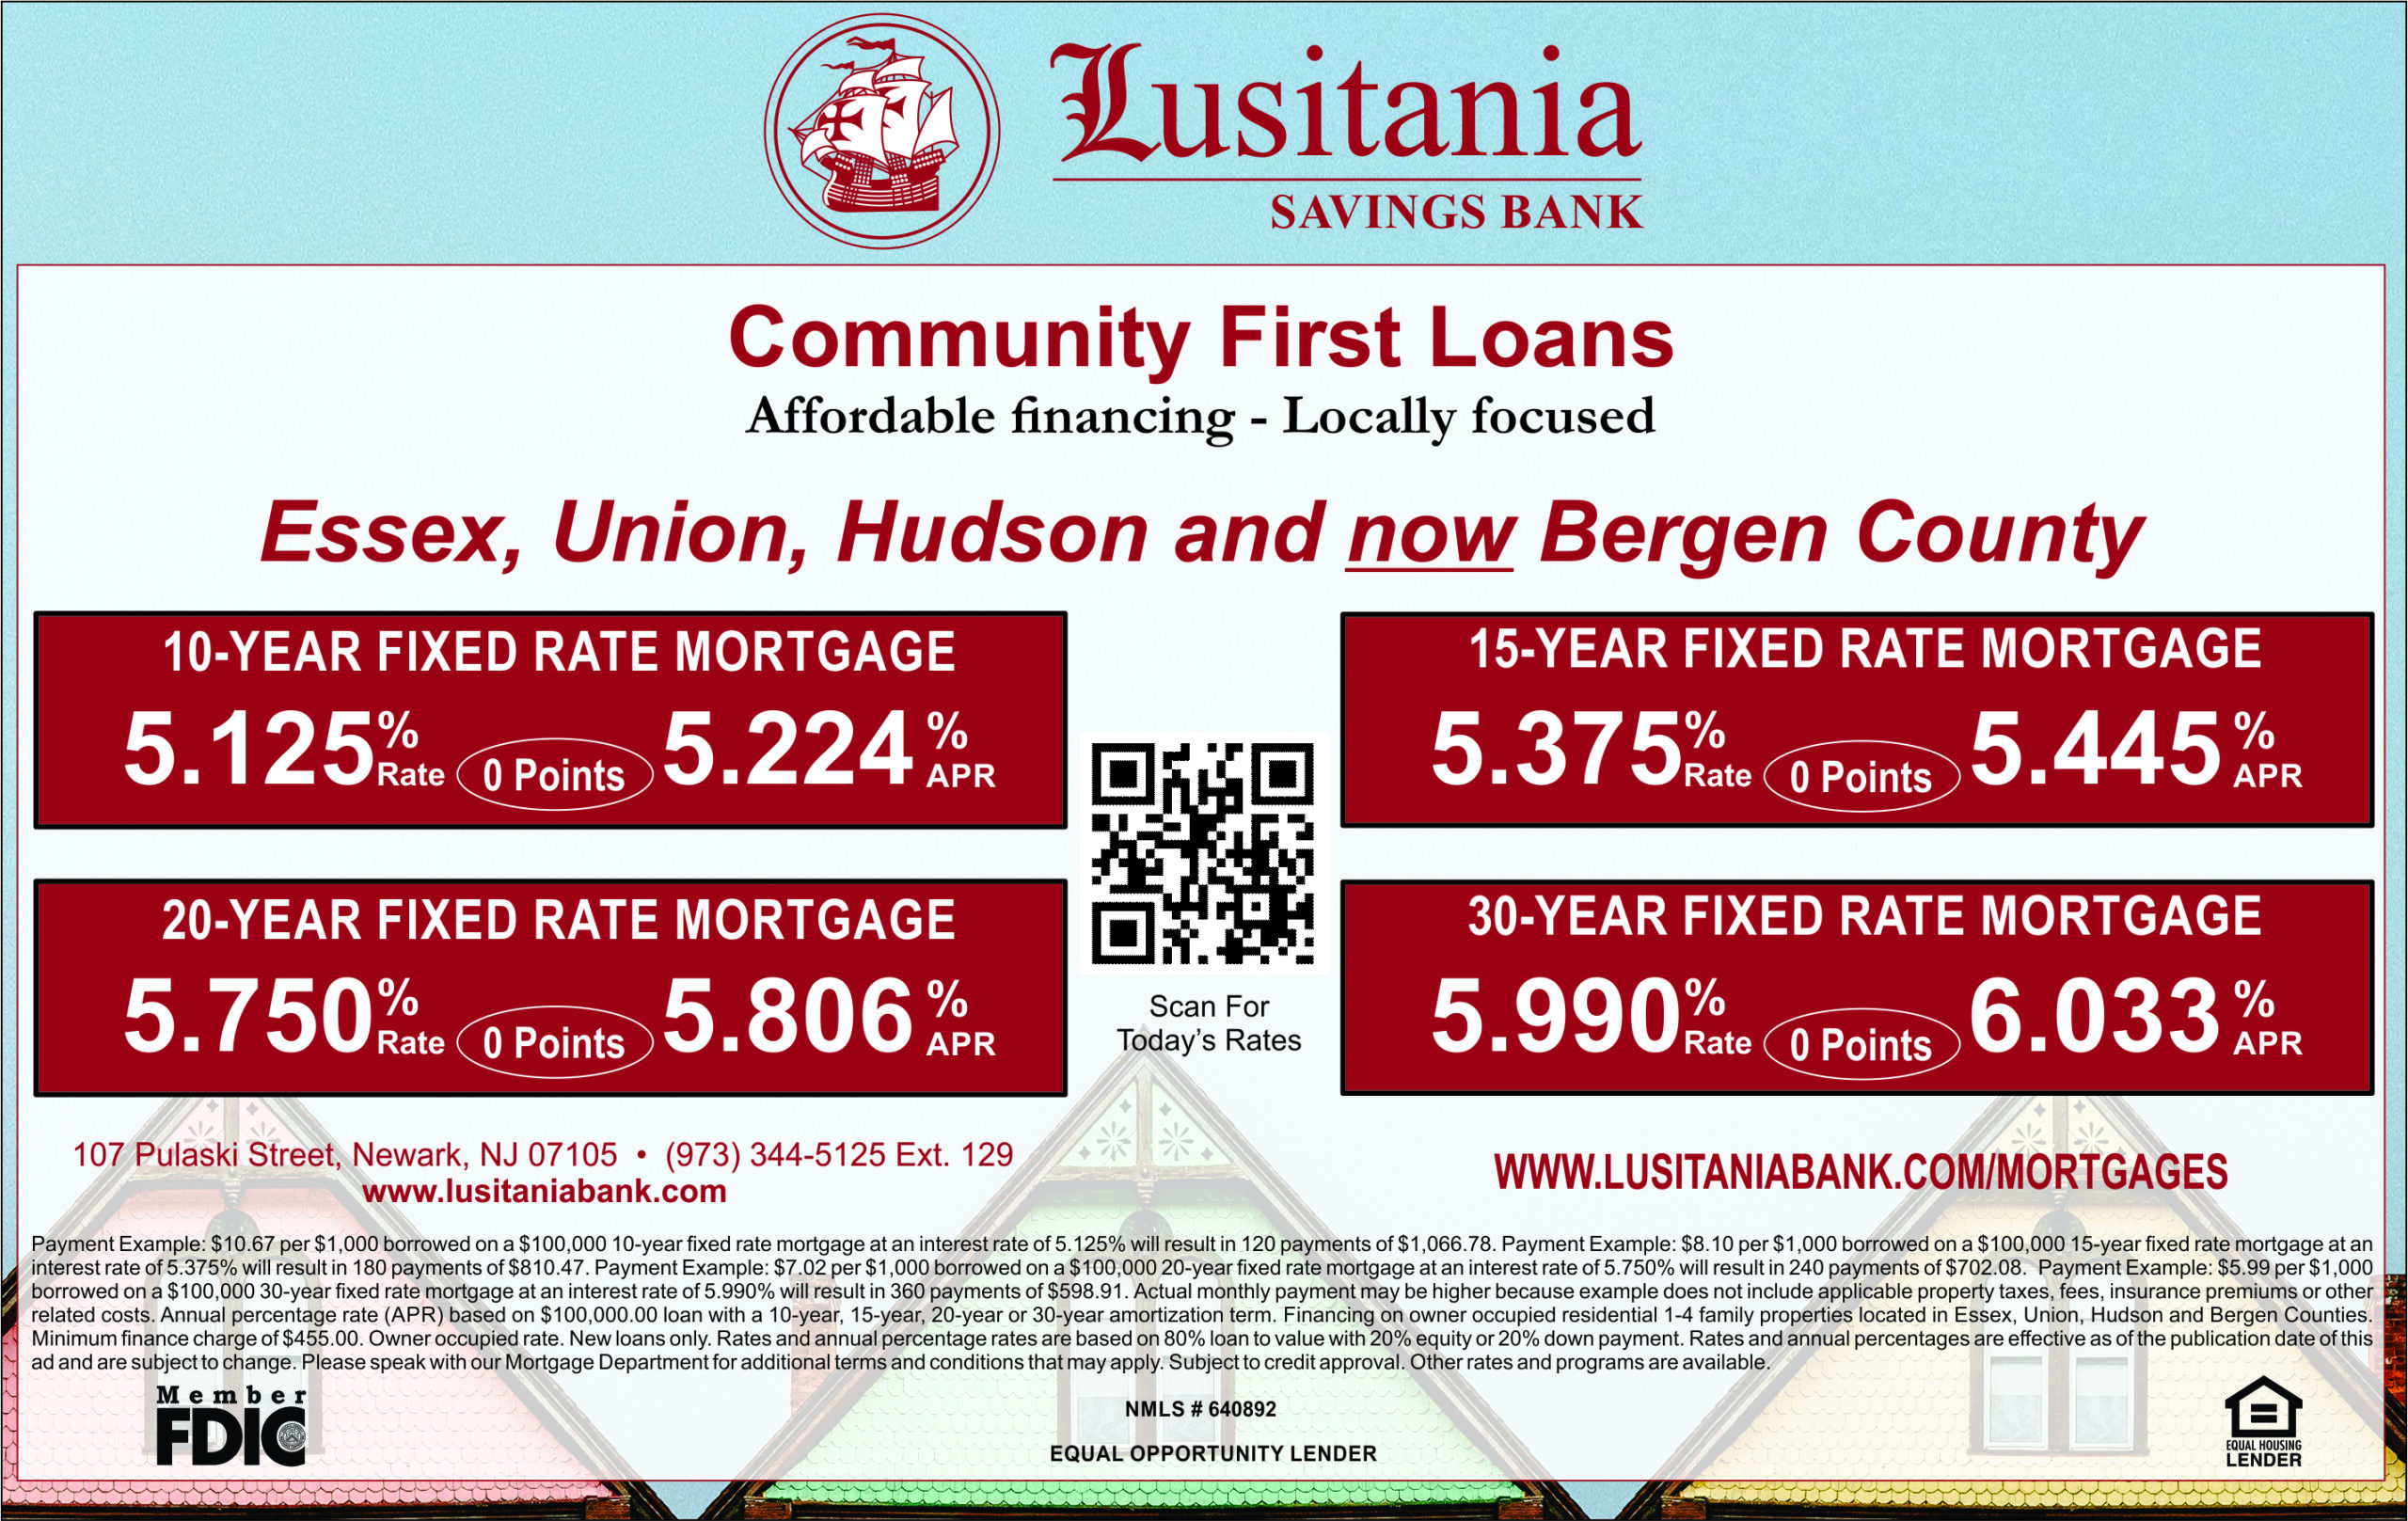 Community First Loans